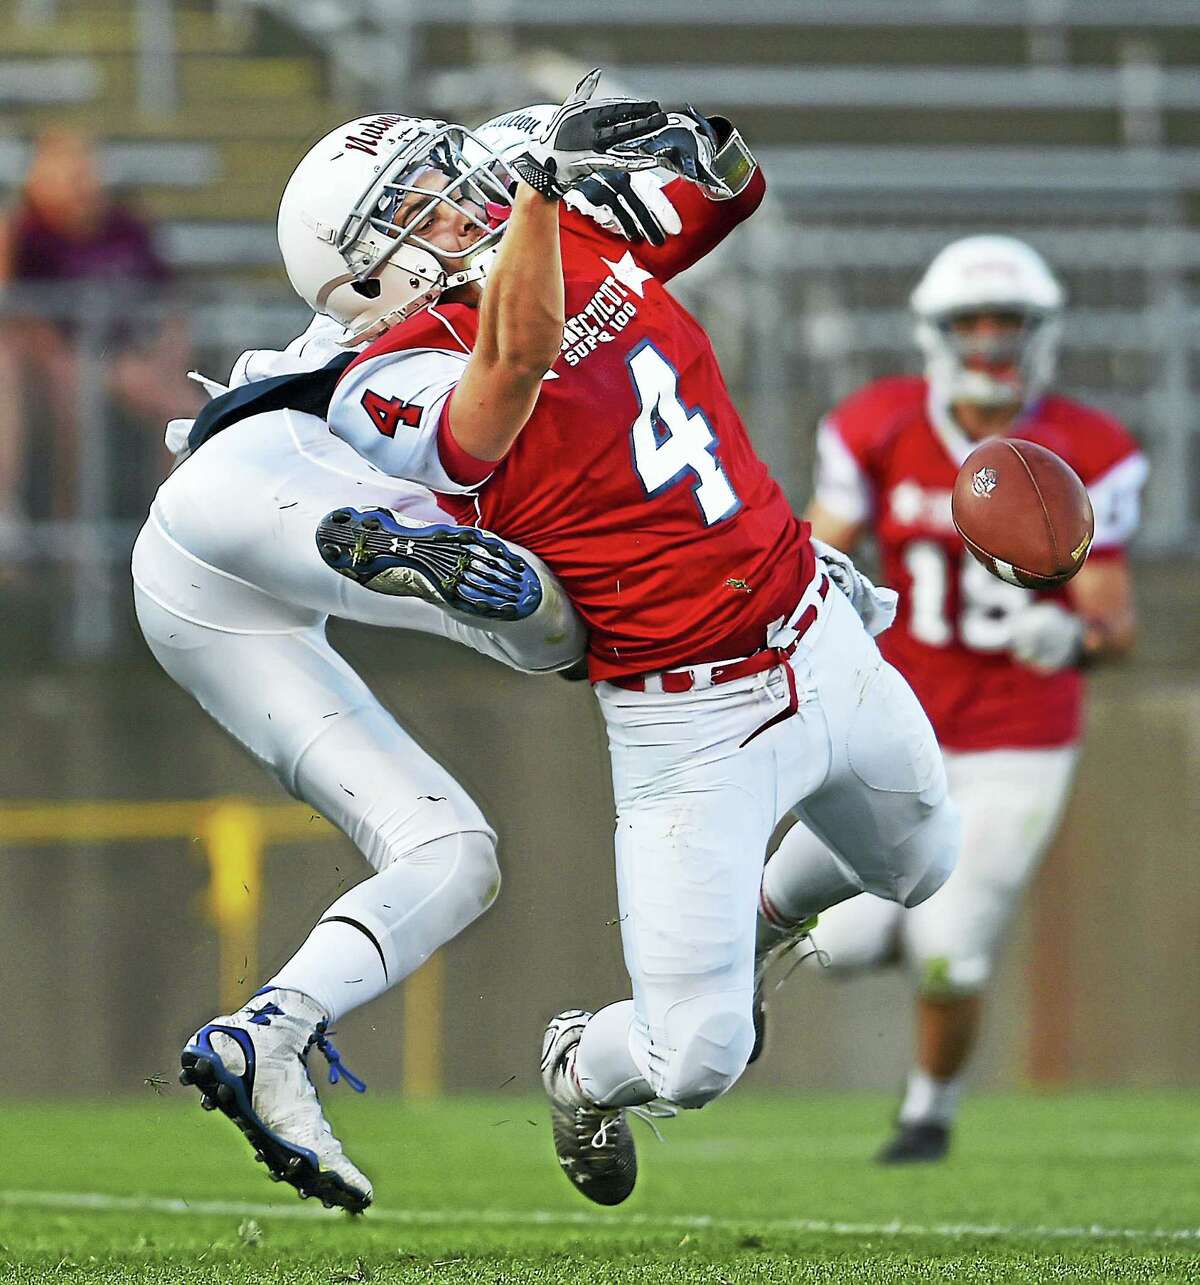 A Constitution defenseman breaks up a pass intended for Nutmeg’s Anthony Caramanica - Xavier, Saturday, June 25, 2016, in the Super 100 Classic 2016 High School Senior All-Star Football game sponsored by the Connecticut High School Coaches Association. Team Constitution defeated Team Nutmeg, 33-9.